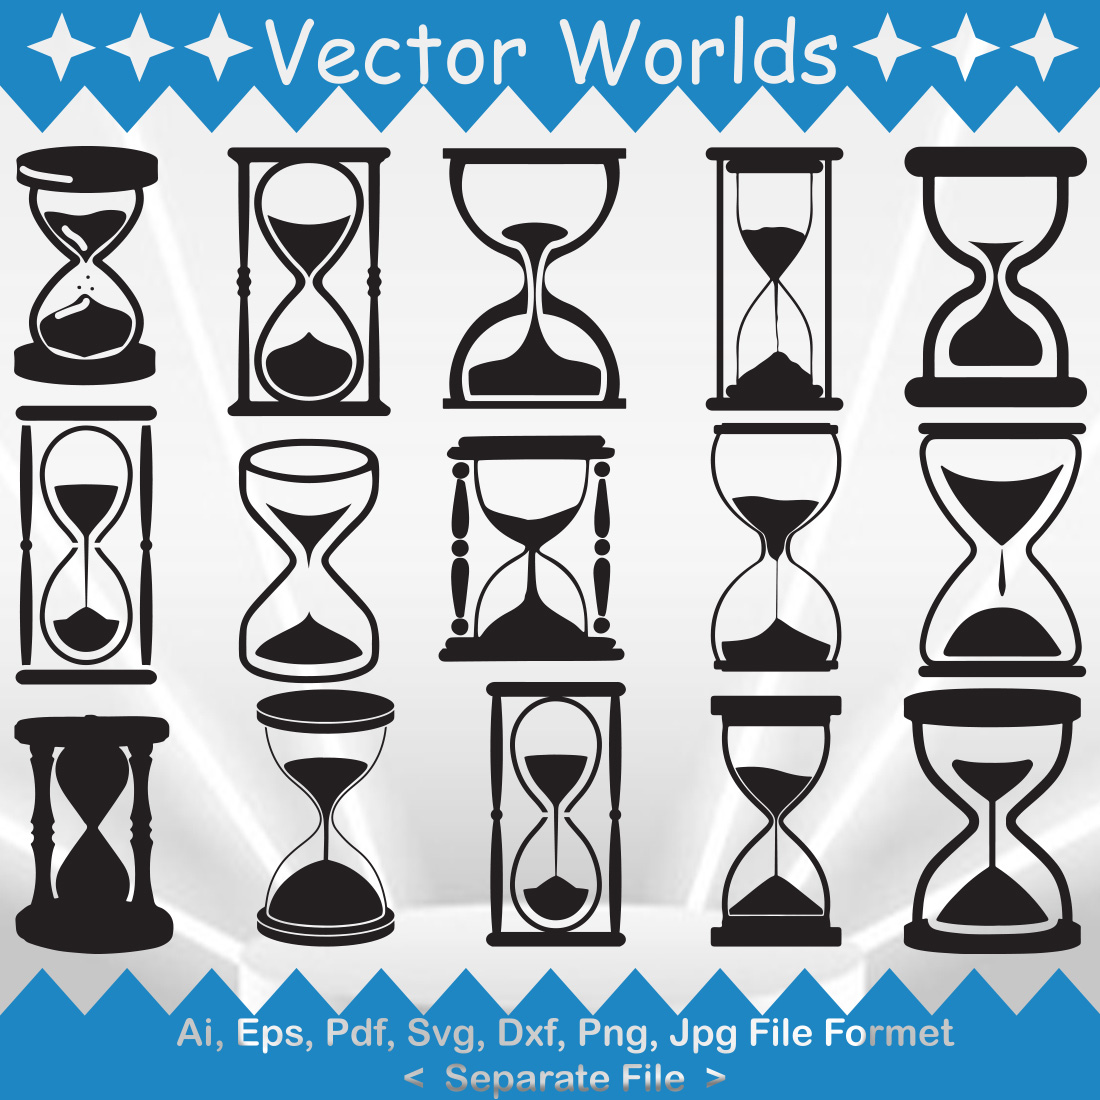 Hourglass SVG Vector Design cover image.